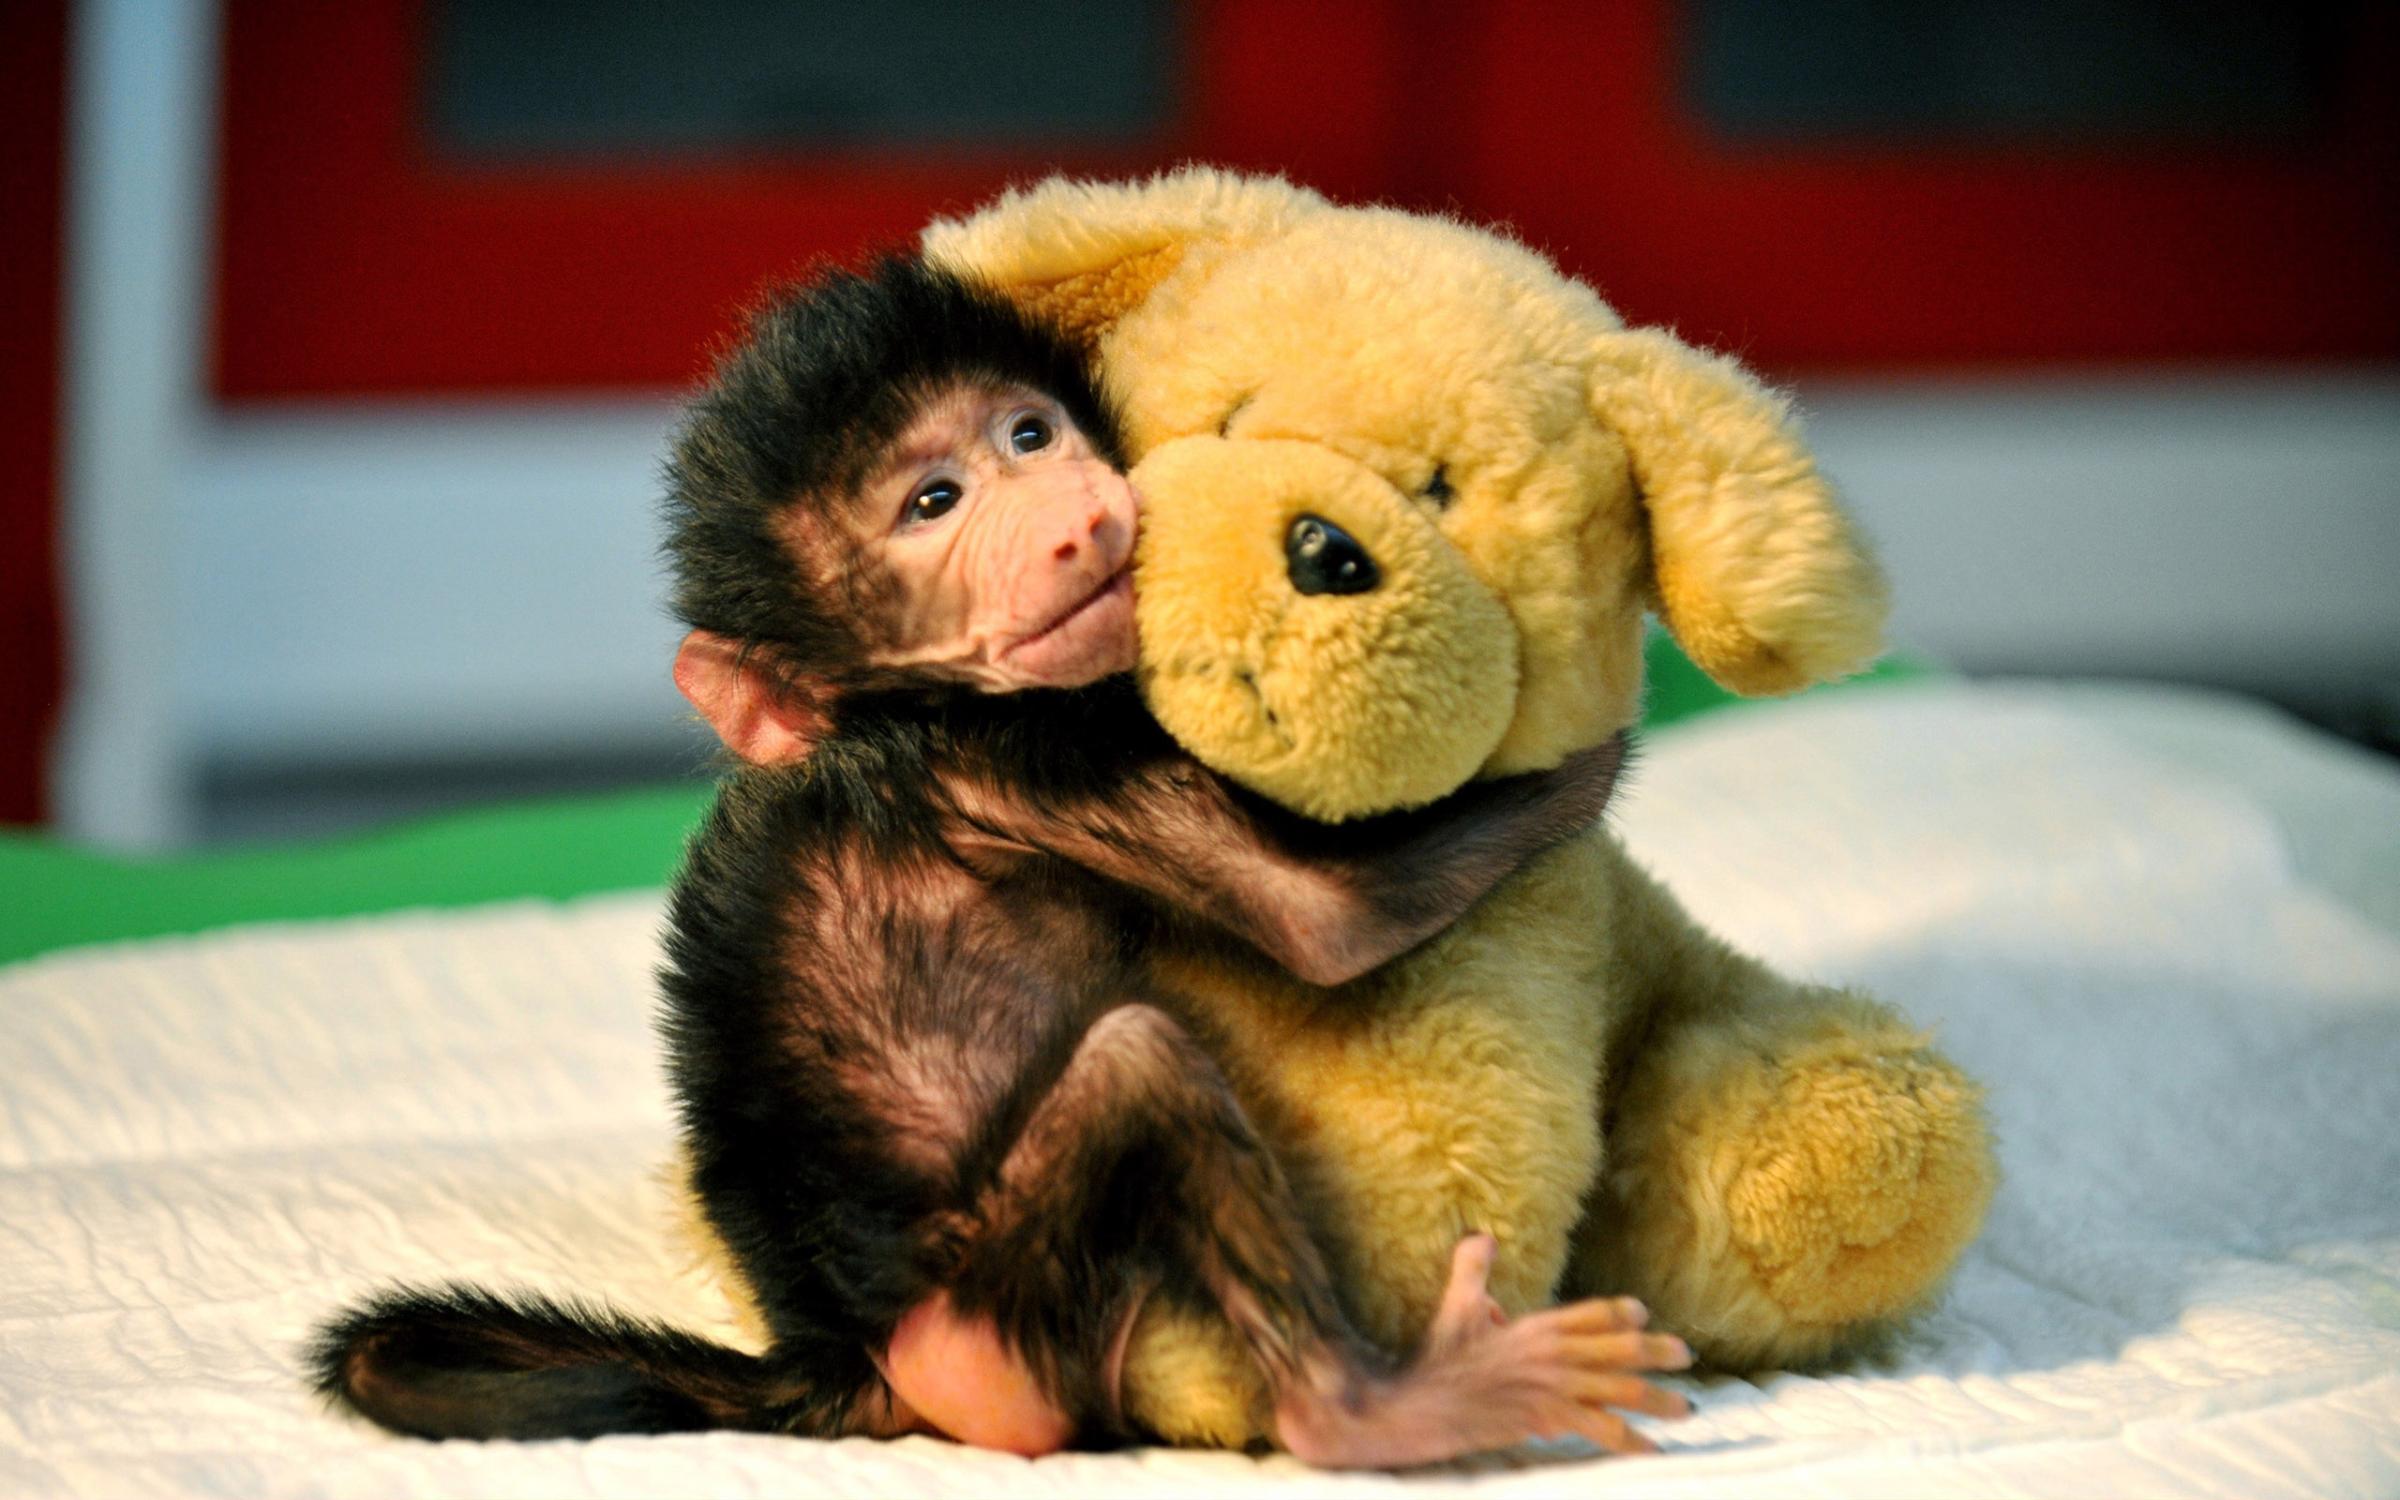 A newborn baboon cuddles a teddy bear after its mom refused to have her at Gaziantep Zoo, in Gazitantep, Turkey on Nov. 15, 2014.